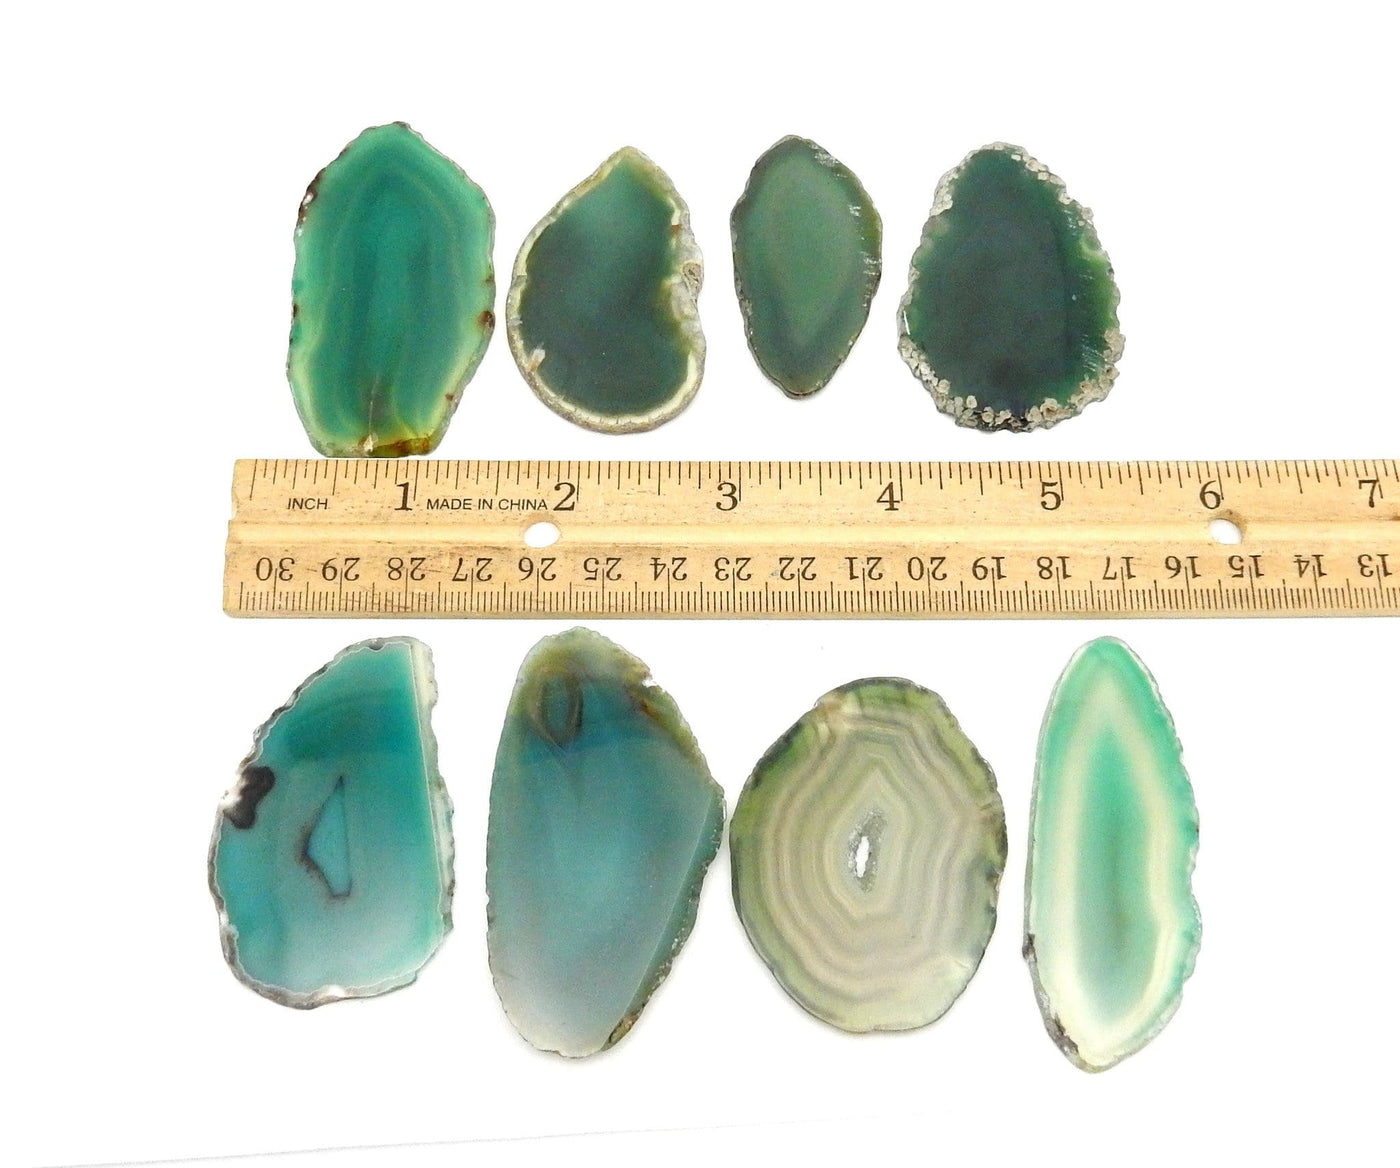 Picture of green agate slices next to ruler for size reference. 